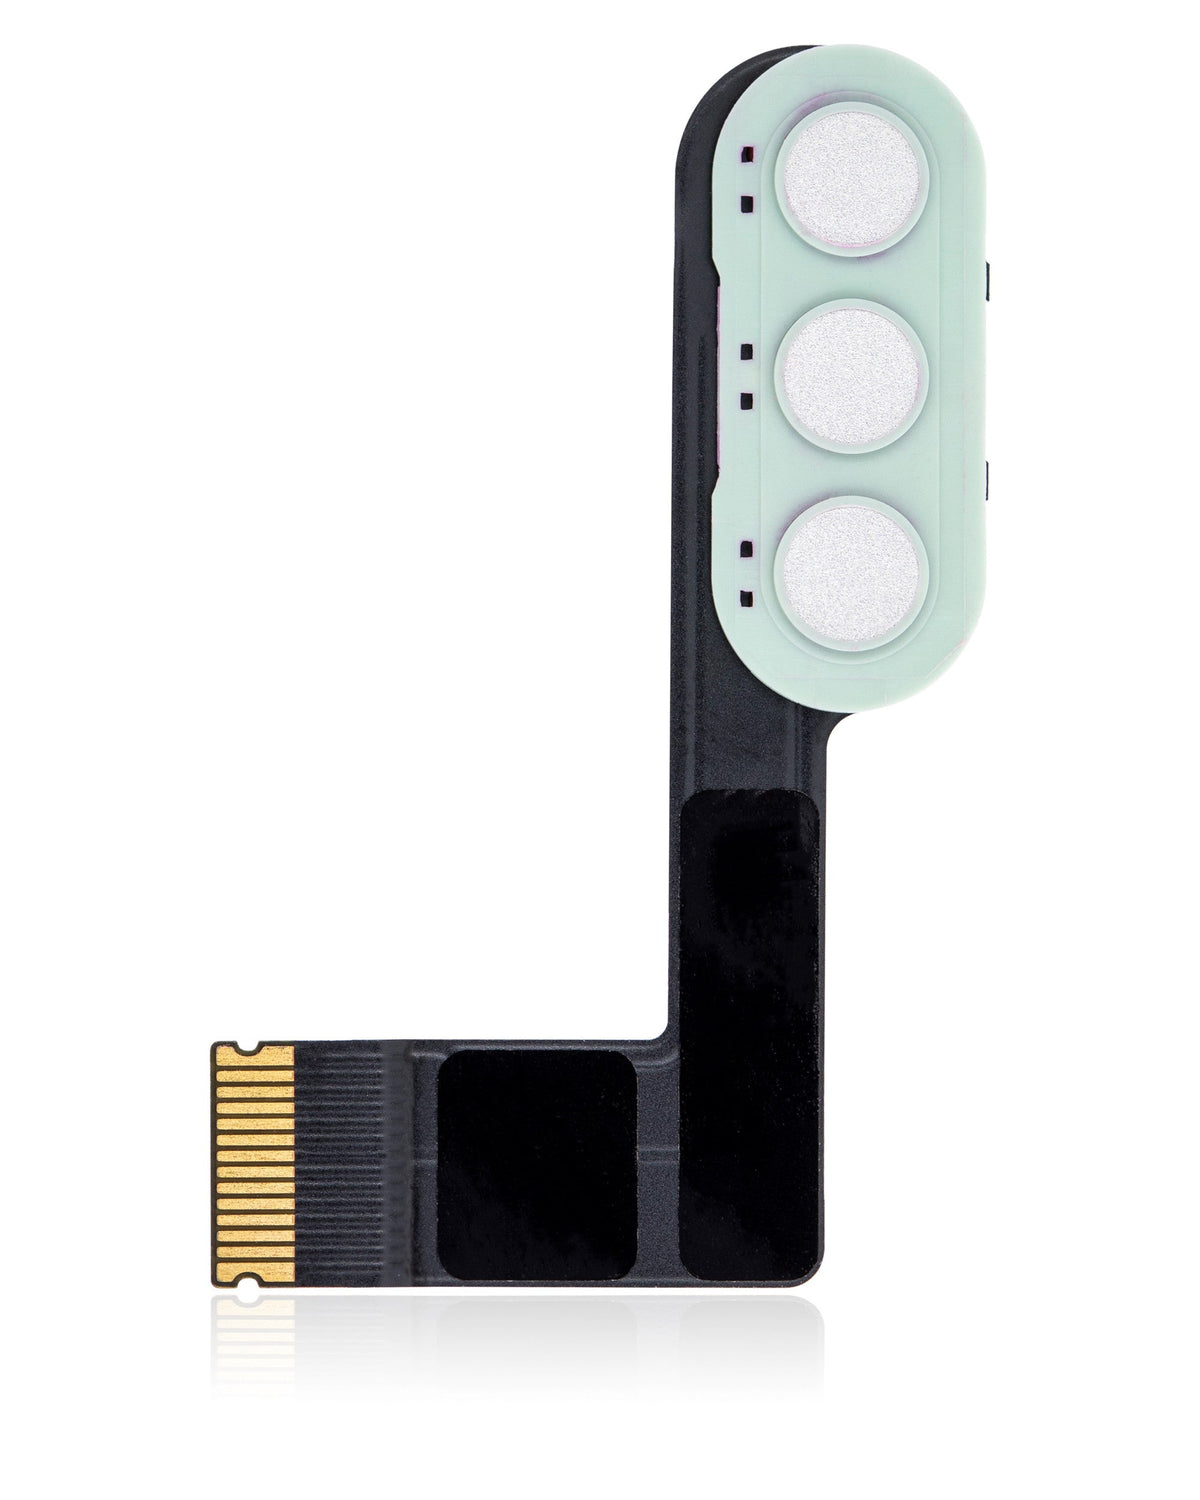 KEYBOARD FLEX CABLE COMPATIBLE FOR IPAD AIR 4/5 - GREEN